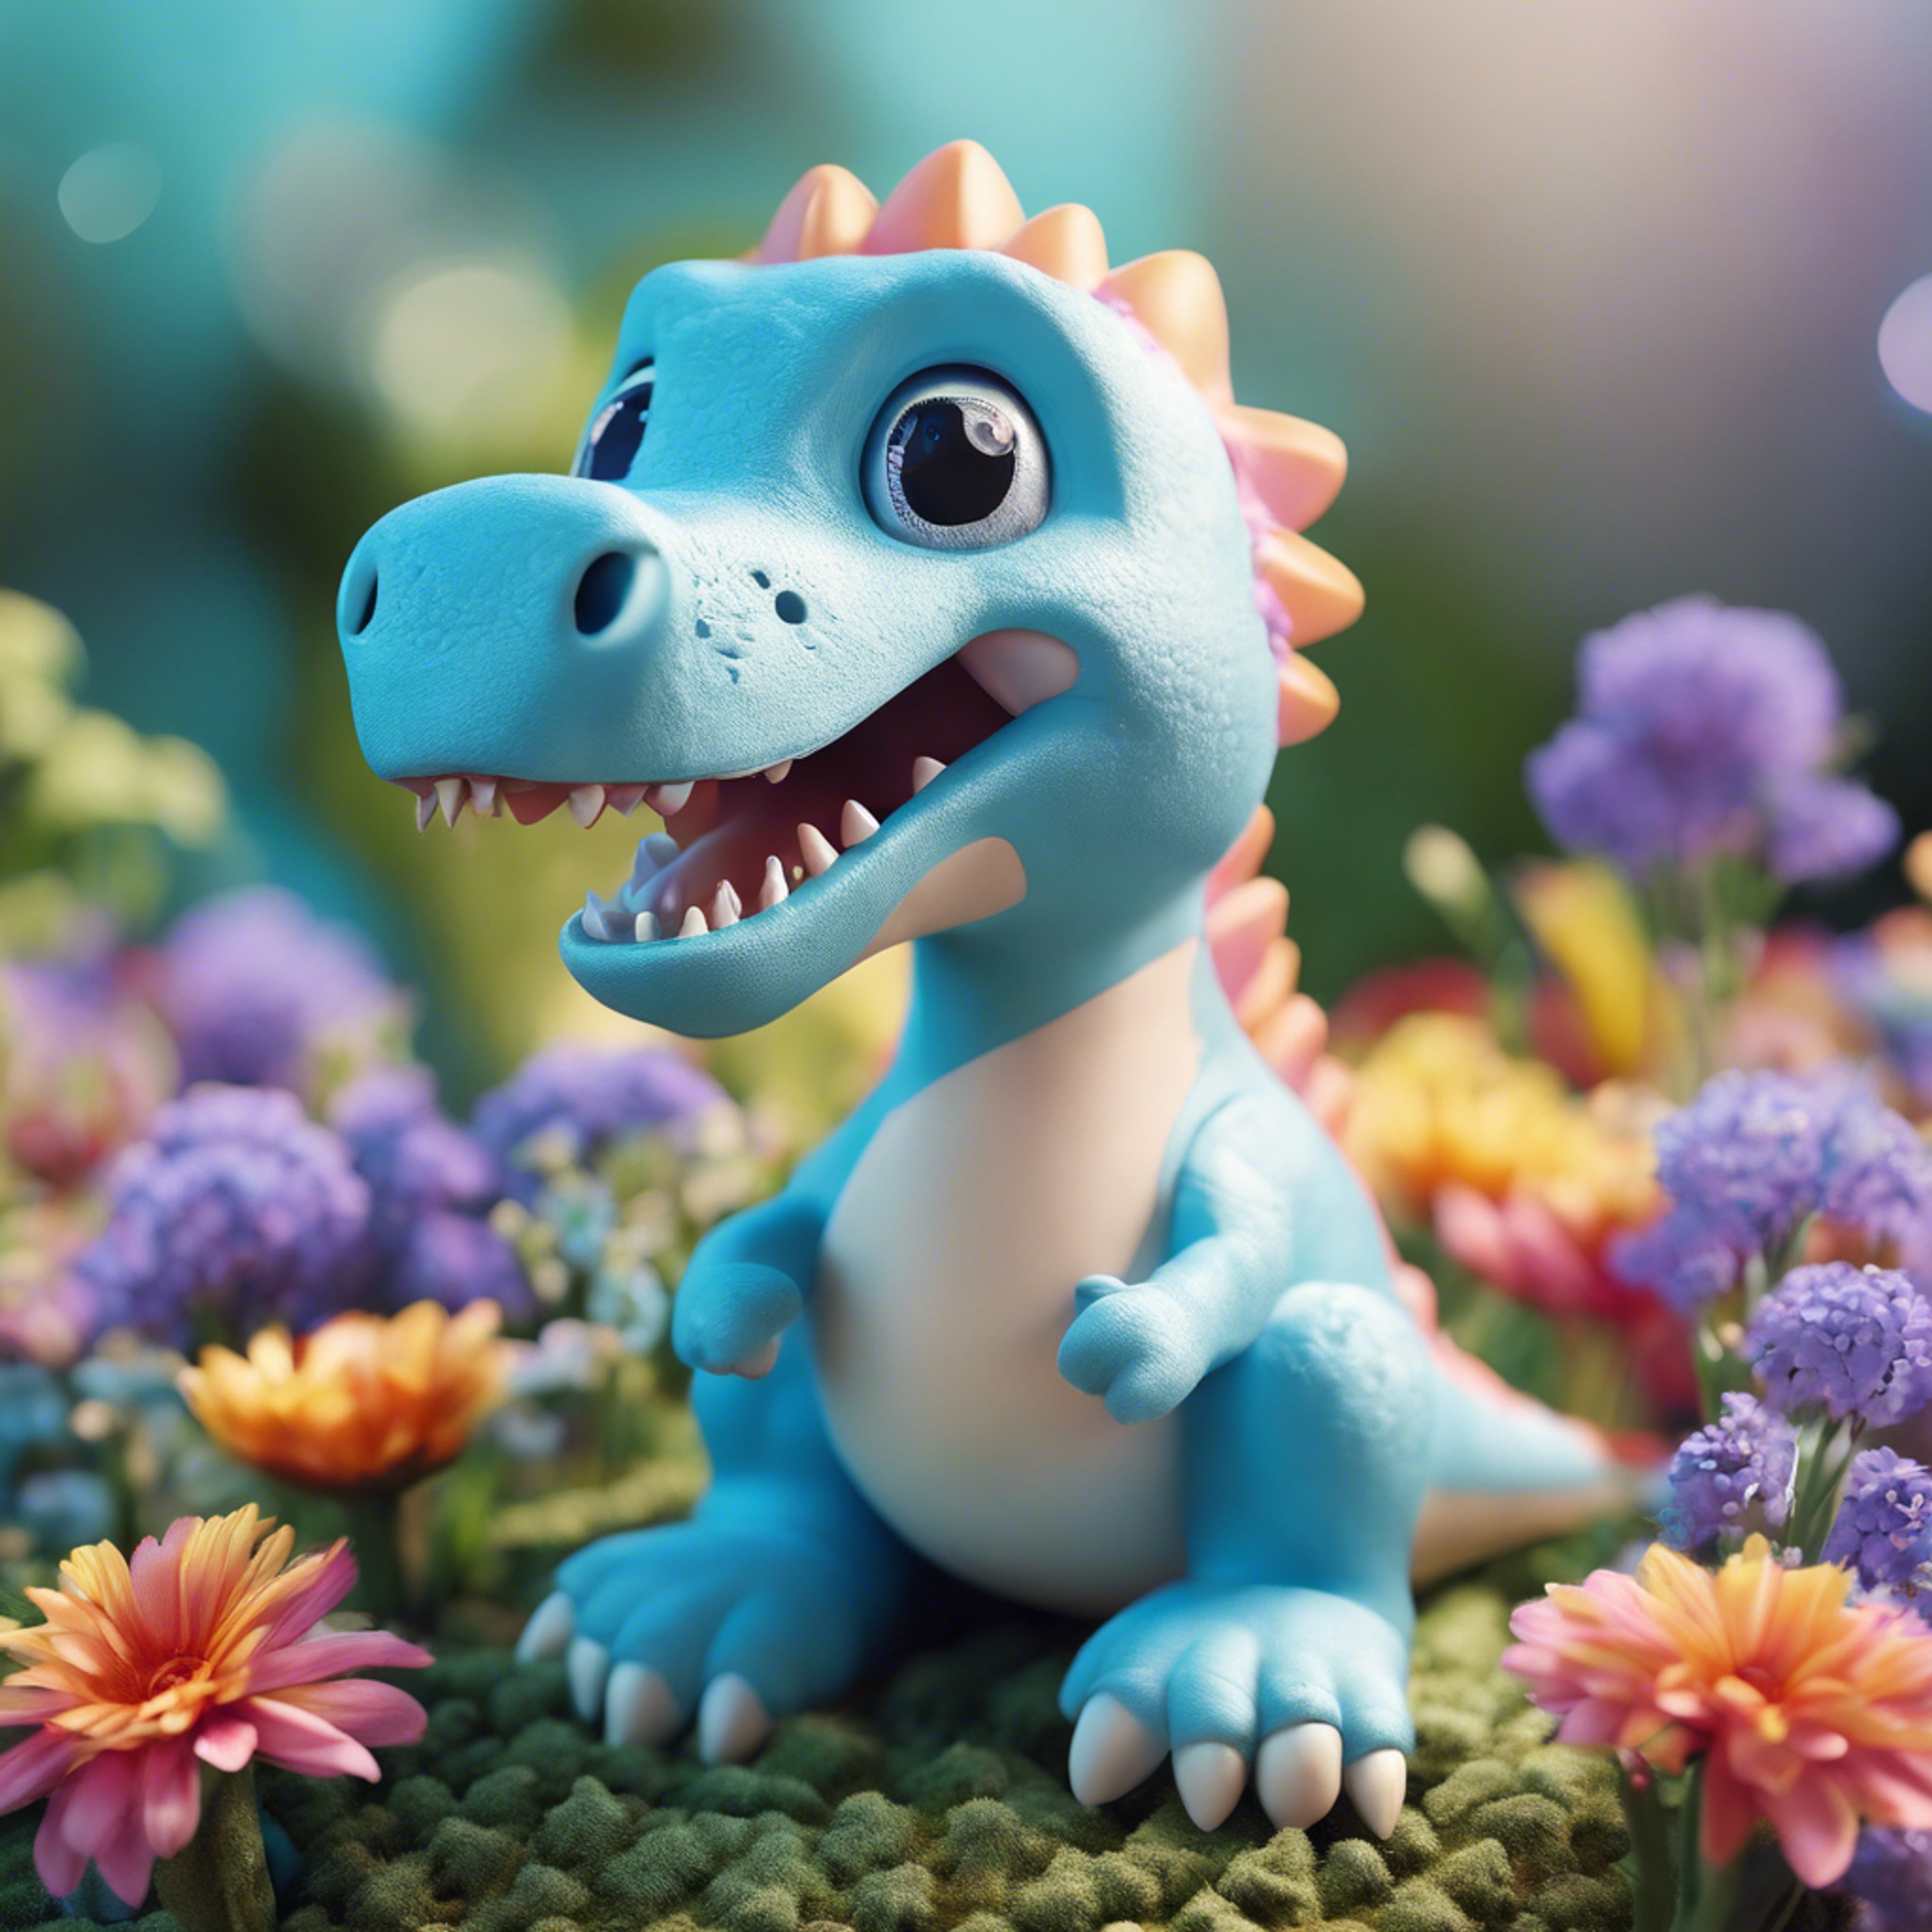 A cute light blue dinosaur with a kawaii expression, surrounded by brightly colored flowers. วอลล์เปเปอร์[445e6142c59b4fa2886e]